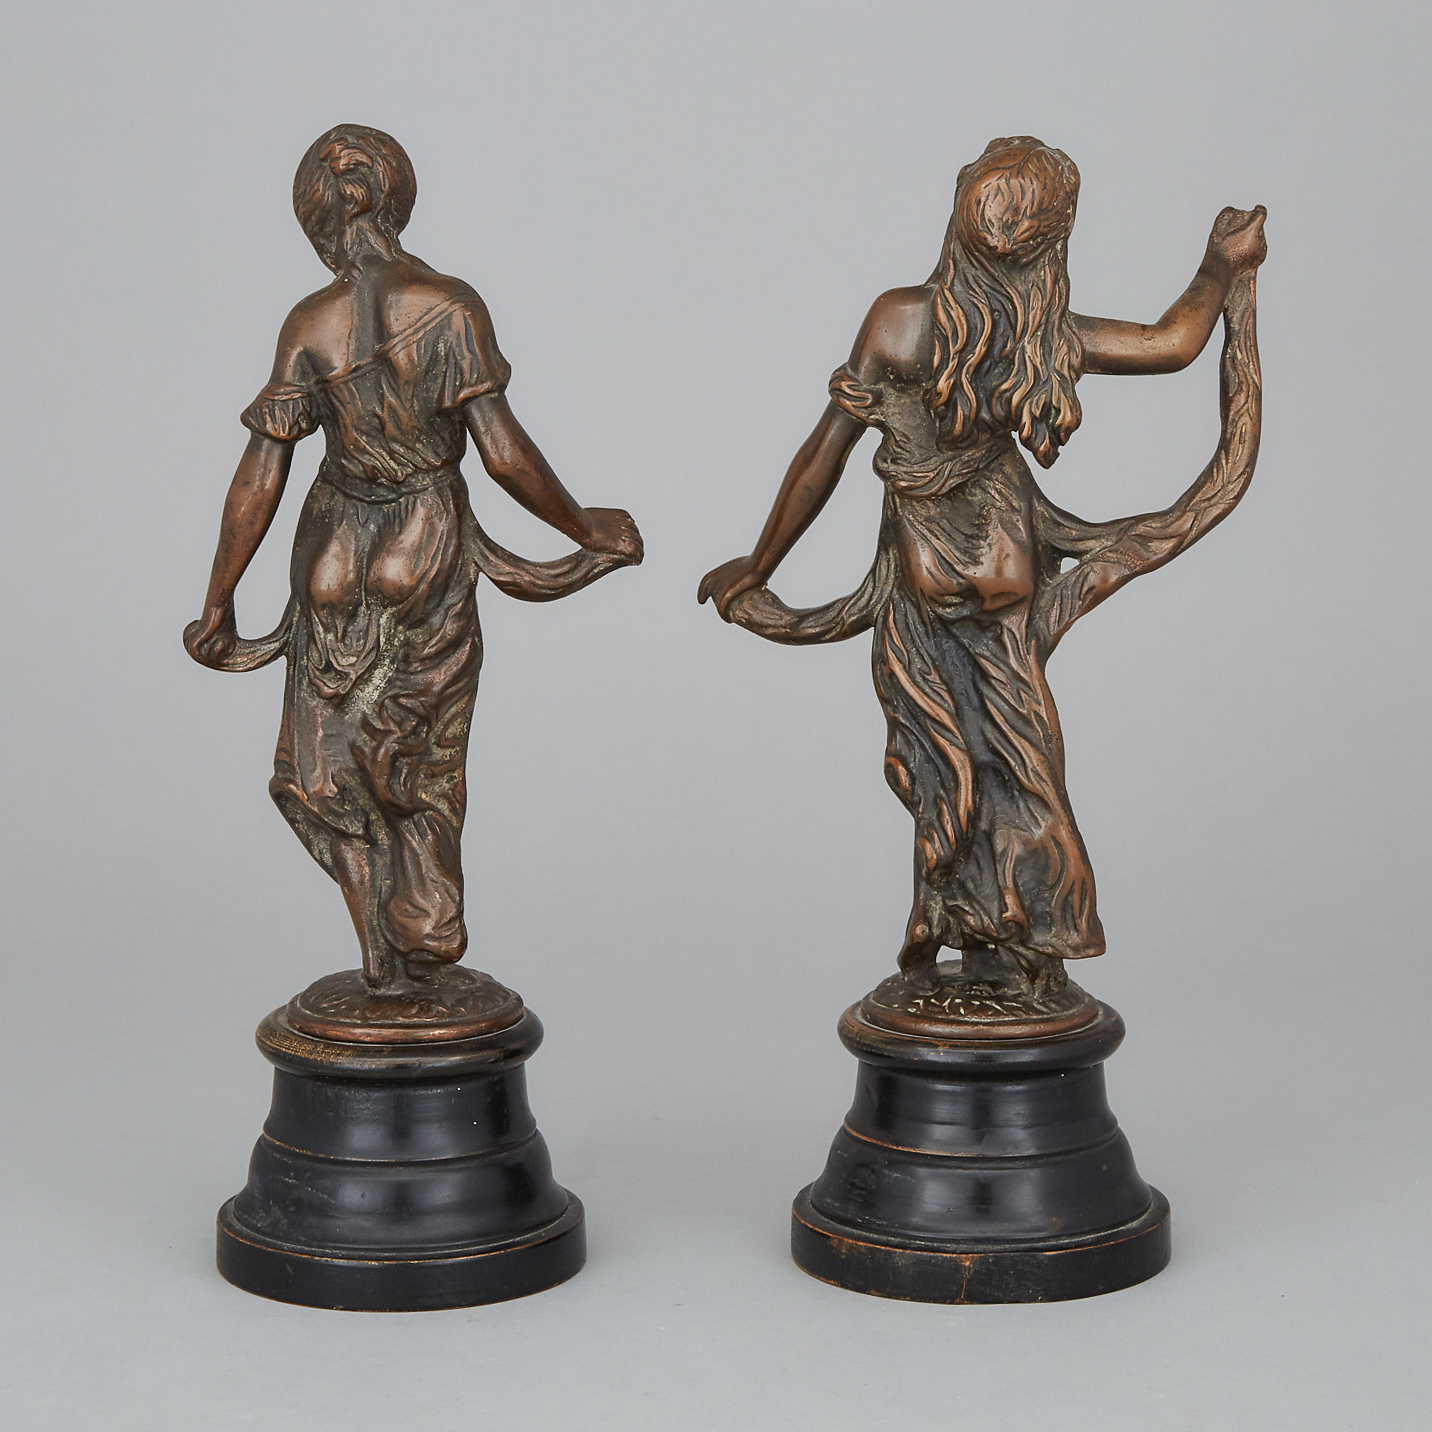 Pair of Victorian Allegorical Patinated Bronze Figures Titled 'Modiste' and 'Gaieté' 19th century